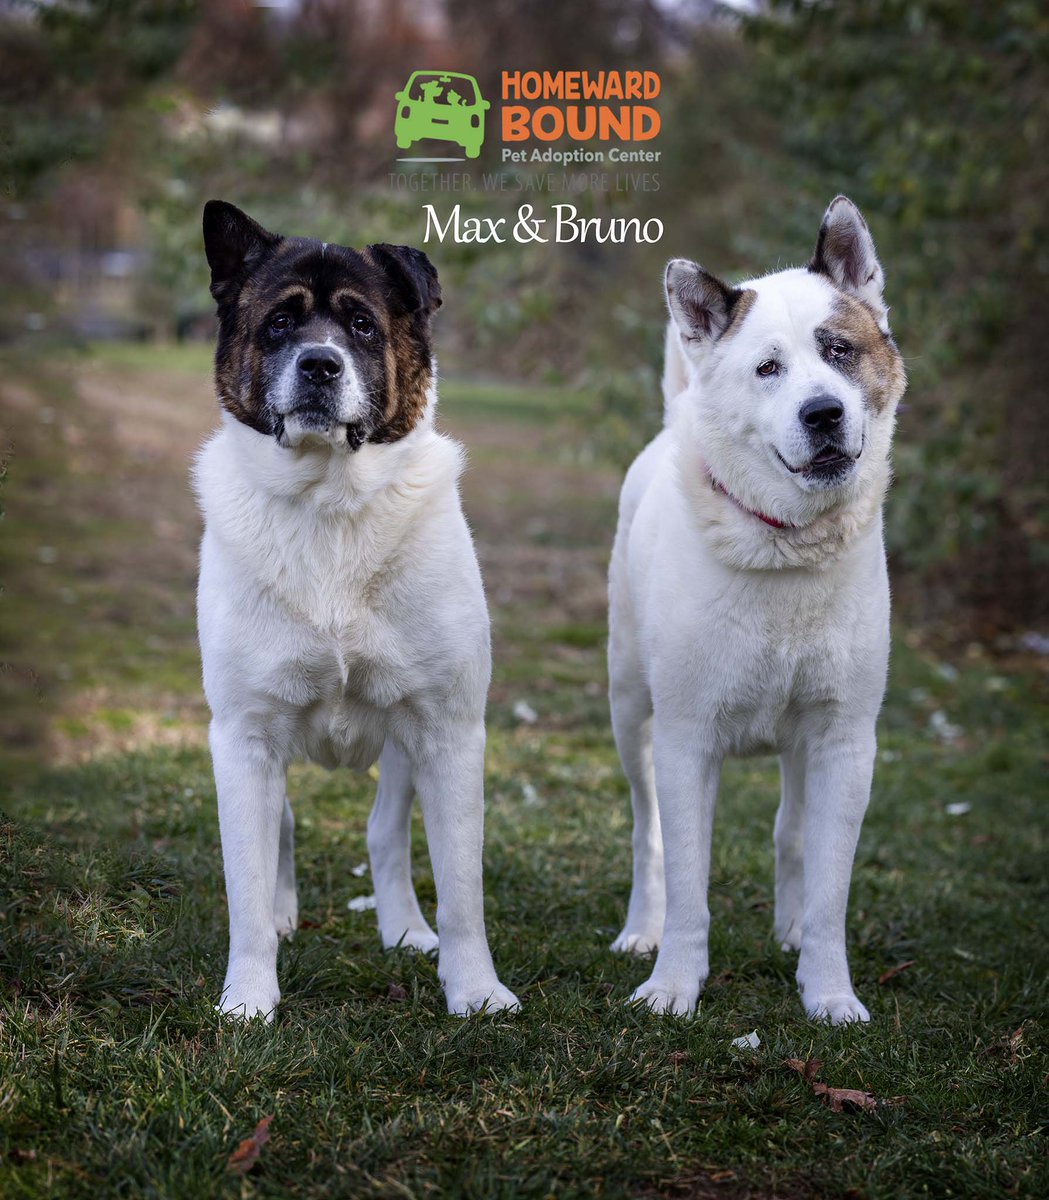 Max and Bruno are a bonded pair of brothers looking for a home together. These big boys can see each other from their kennels and get to go for walks with each other. They are 8 years old and would love a home in time for the holidays. 

#akita #dogsinneed #akitas